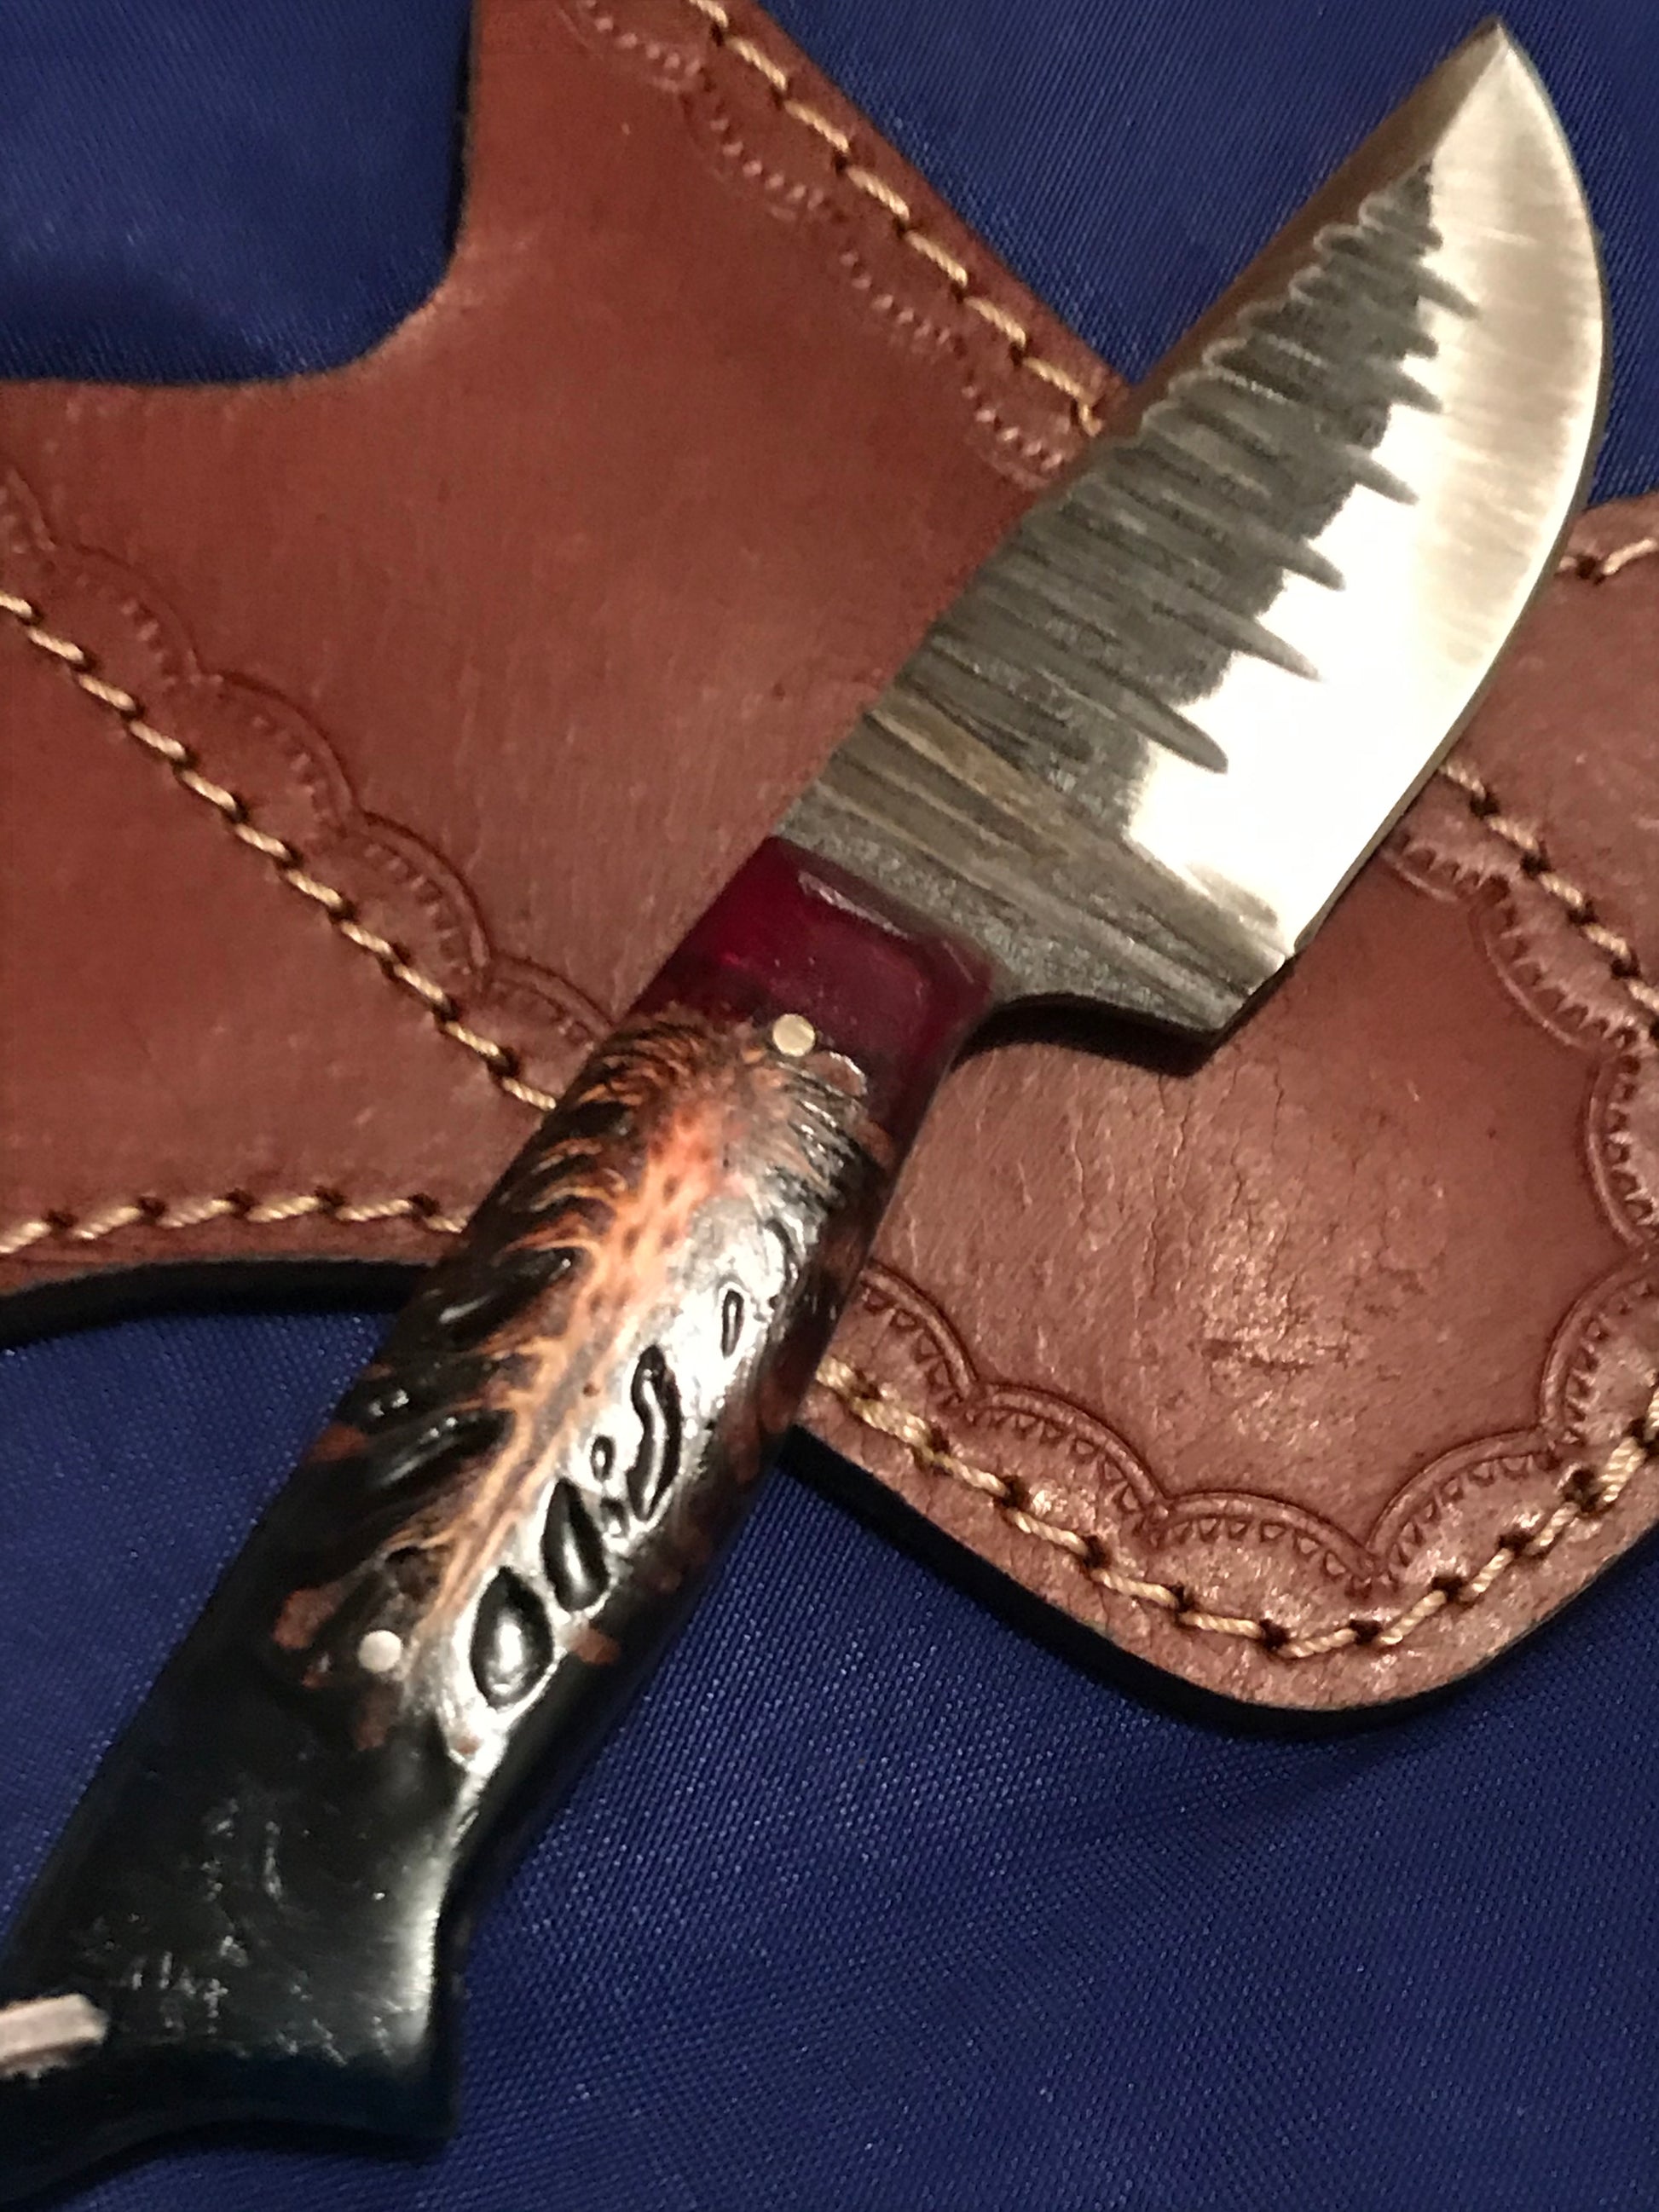 Custom knife with unique handle material imitating banksia cone